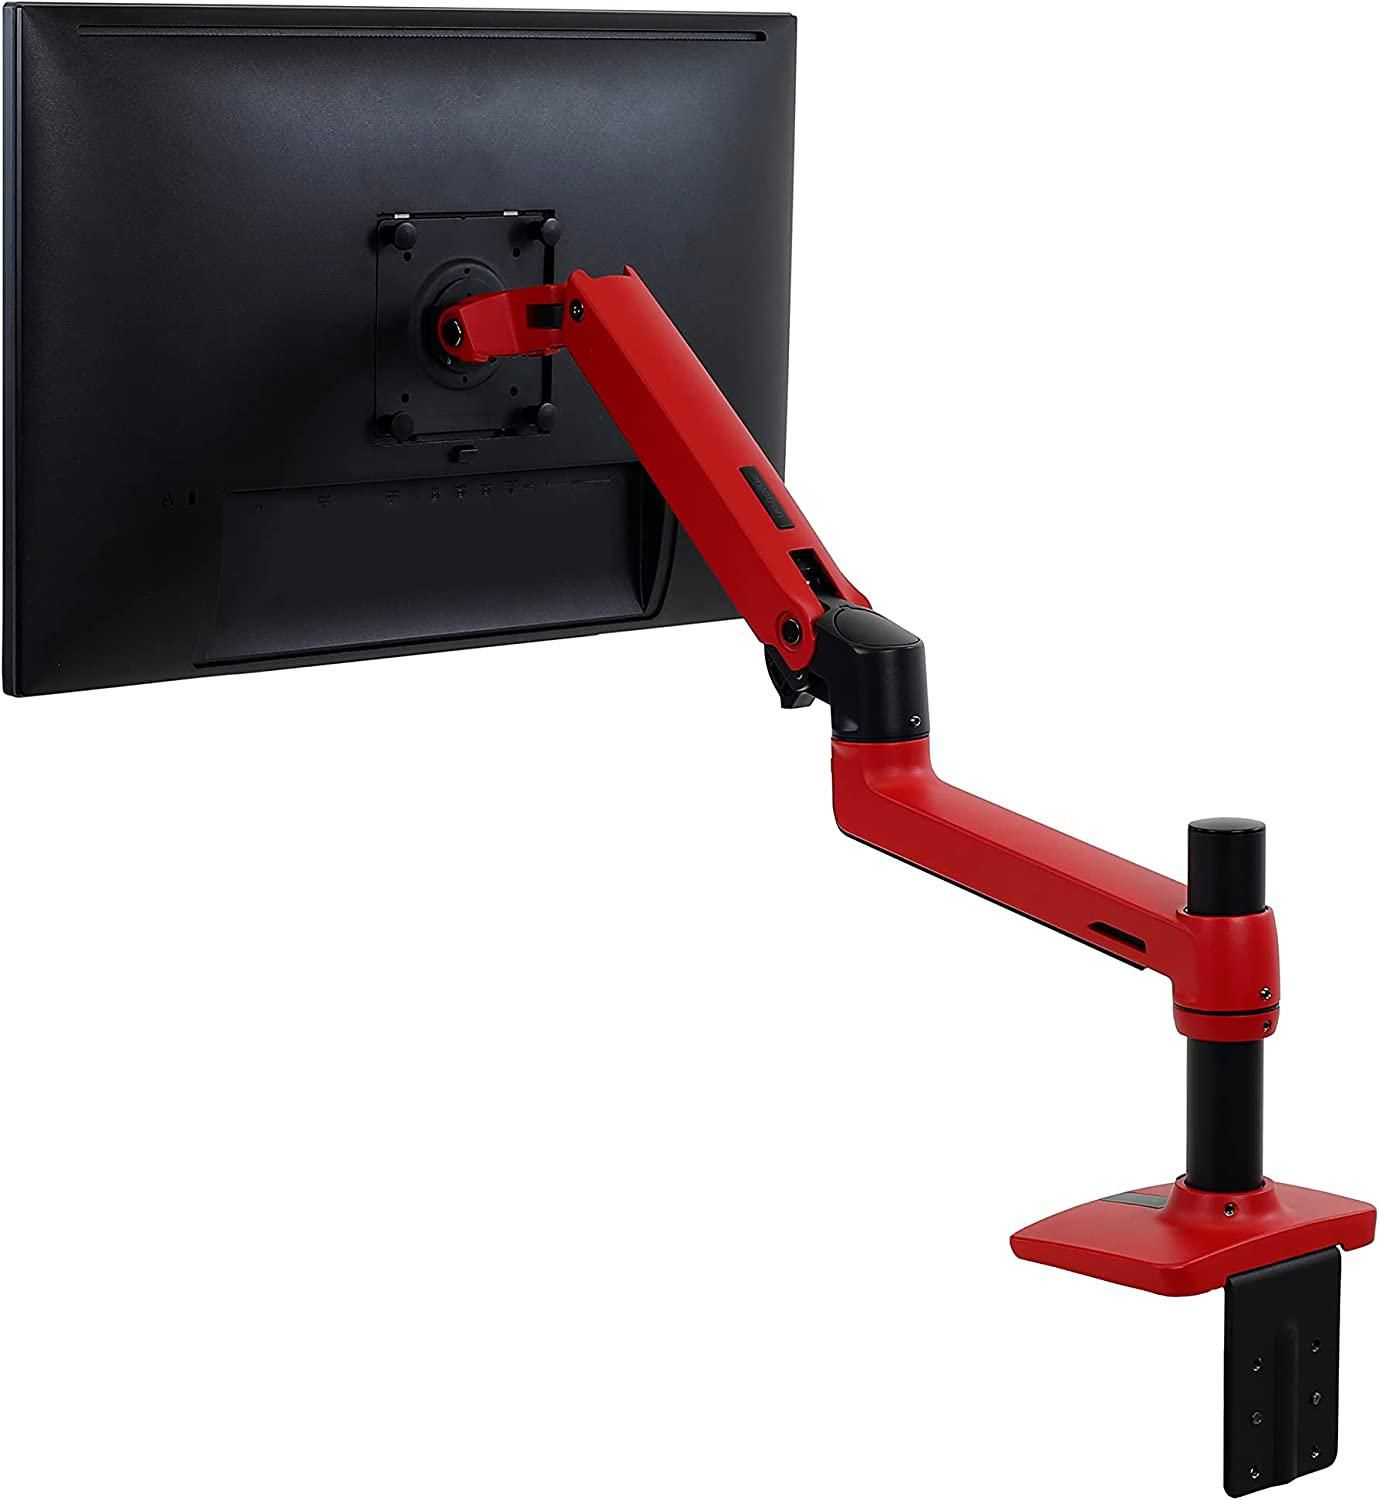 45-490-285 ERGOTRON LX - Mounting kit (pole, monitor arm, 2-piece desk clamp, extension) - for LCD display - red - screen size: up to 34